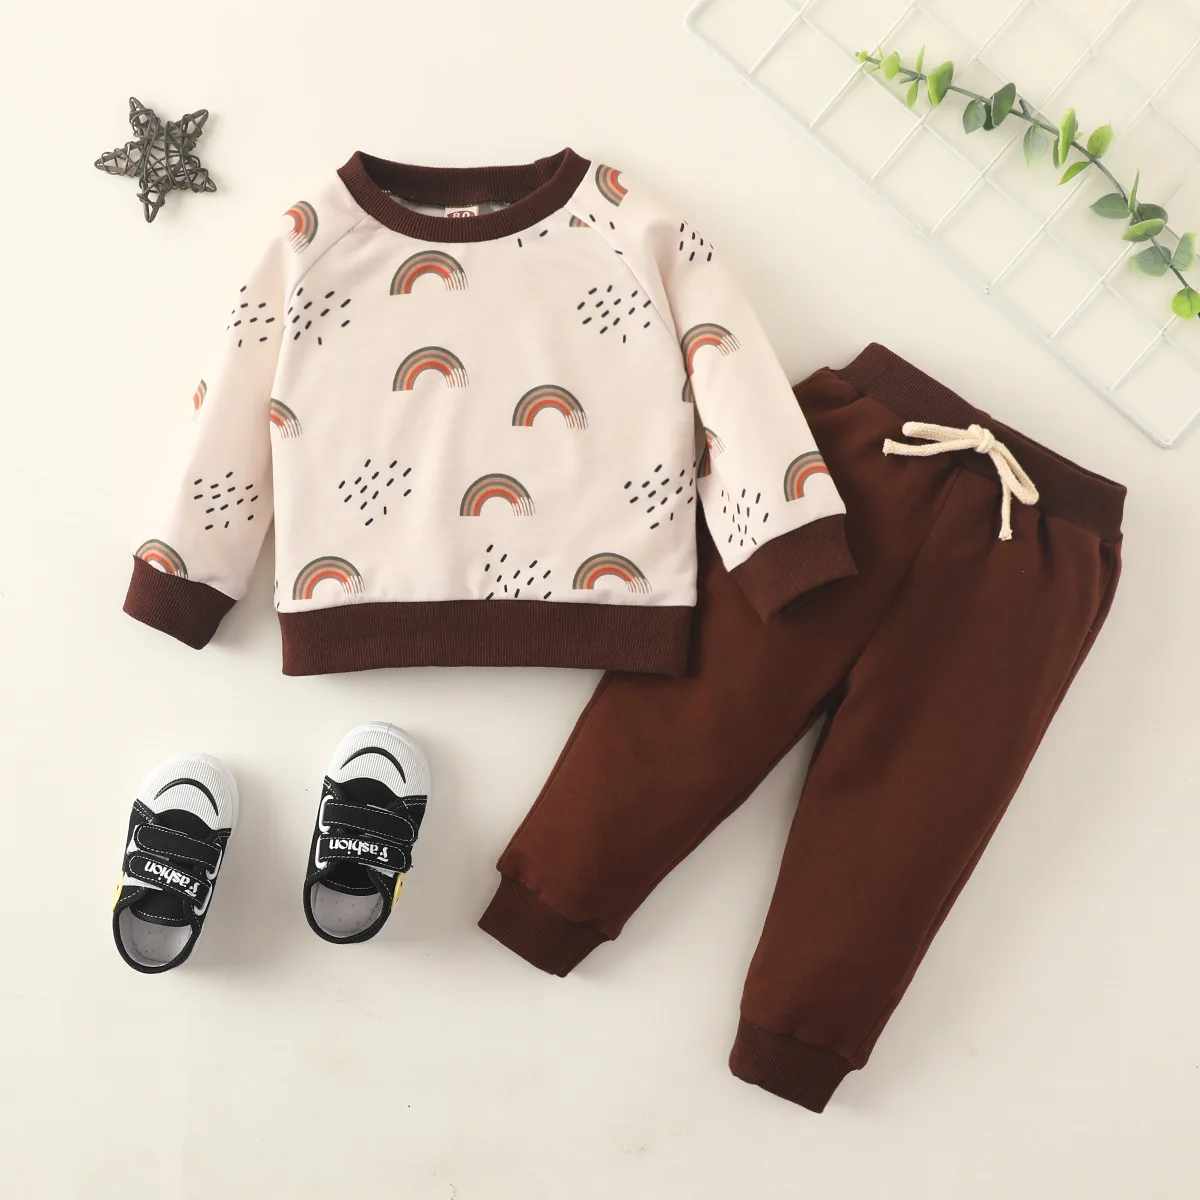 

2pcs Infant Baby Girl Clothes Set Rainbow Long Sleeve Hoodie Tops Pants Fall Winter Outfits suit, As image shown